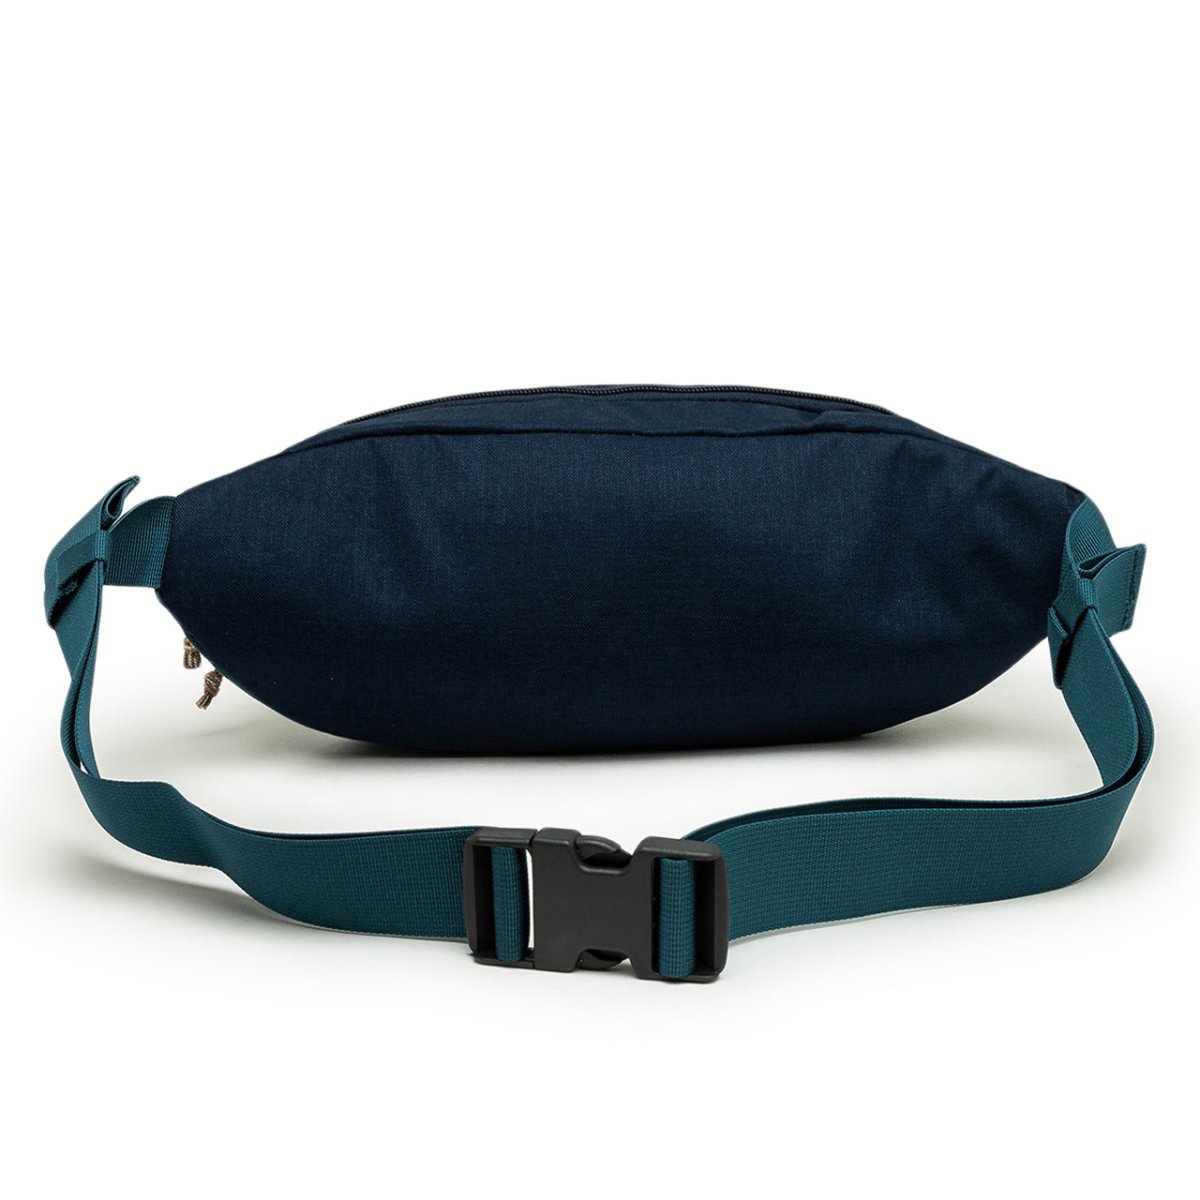 The North Face Lumbar Bag (Navy)  - Allike Store